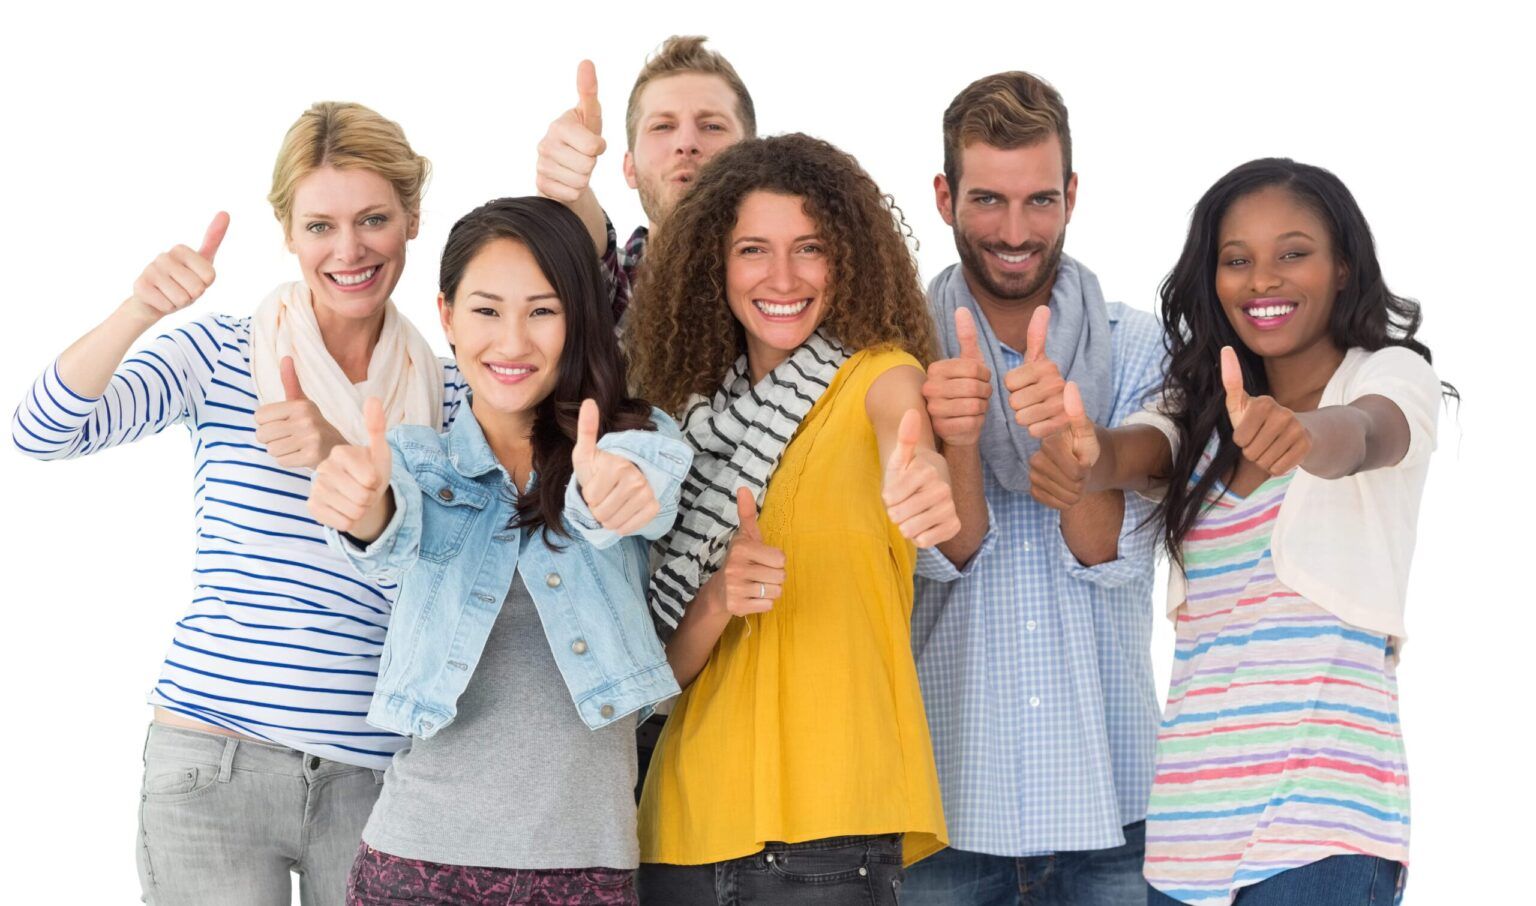 A group of people smiling with whitened teeth and giving a thumbs up.